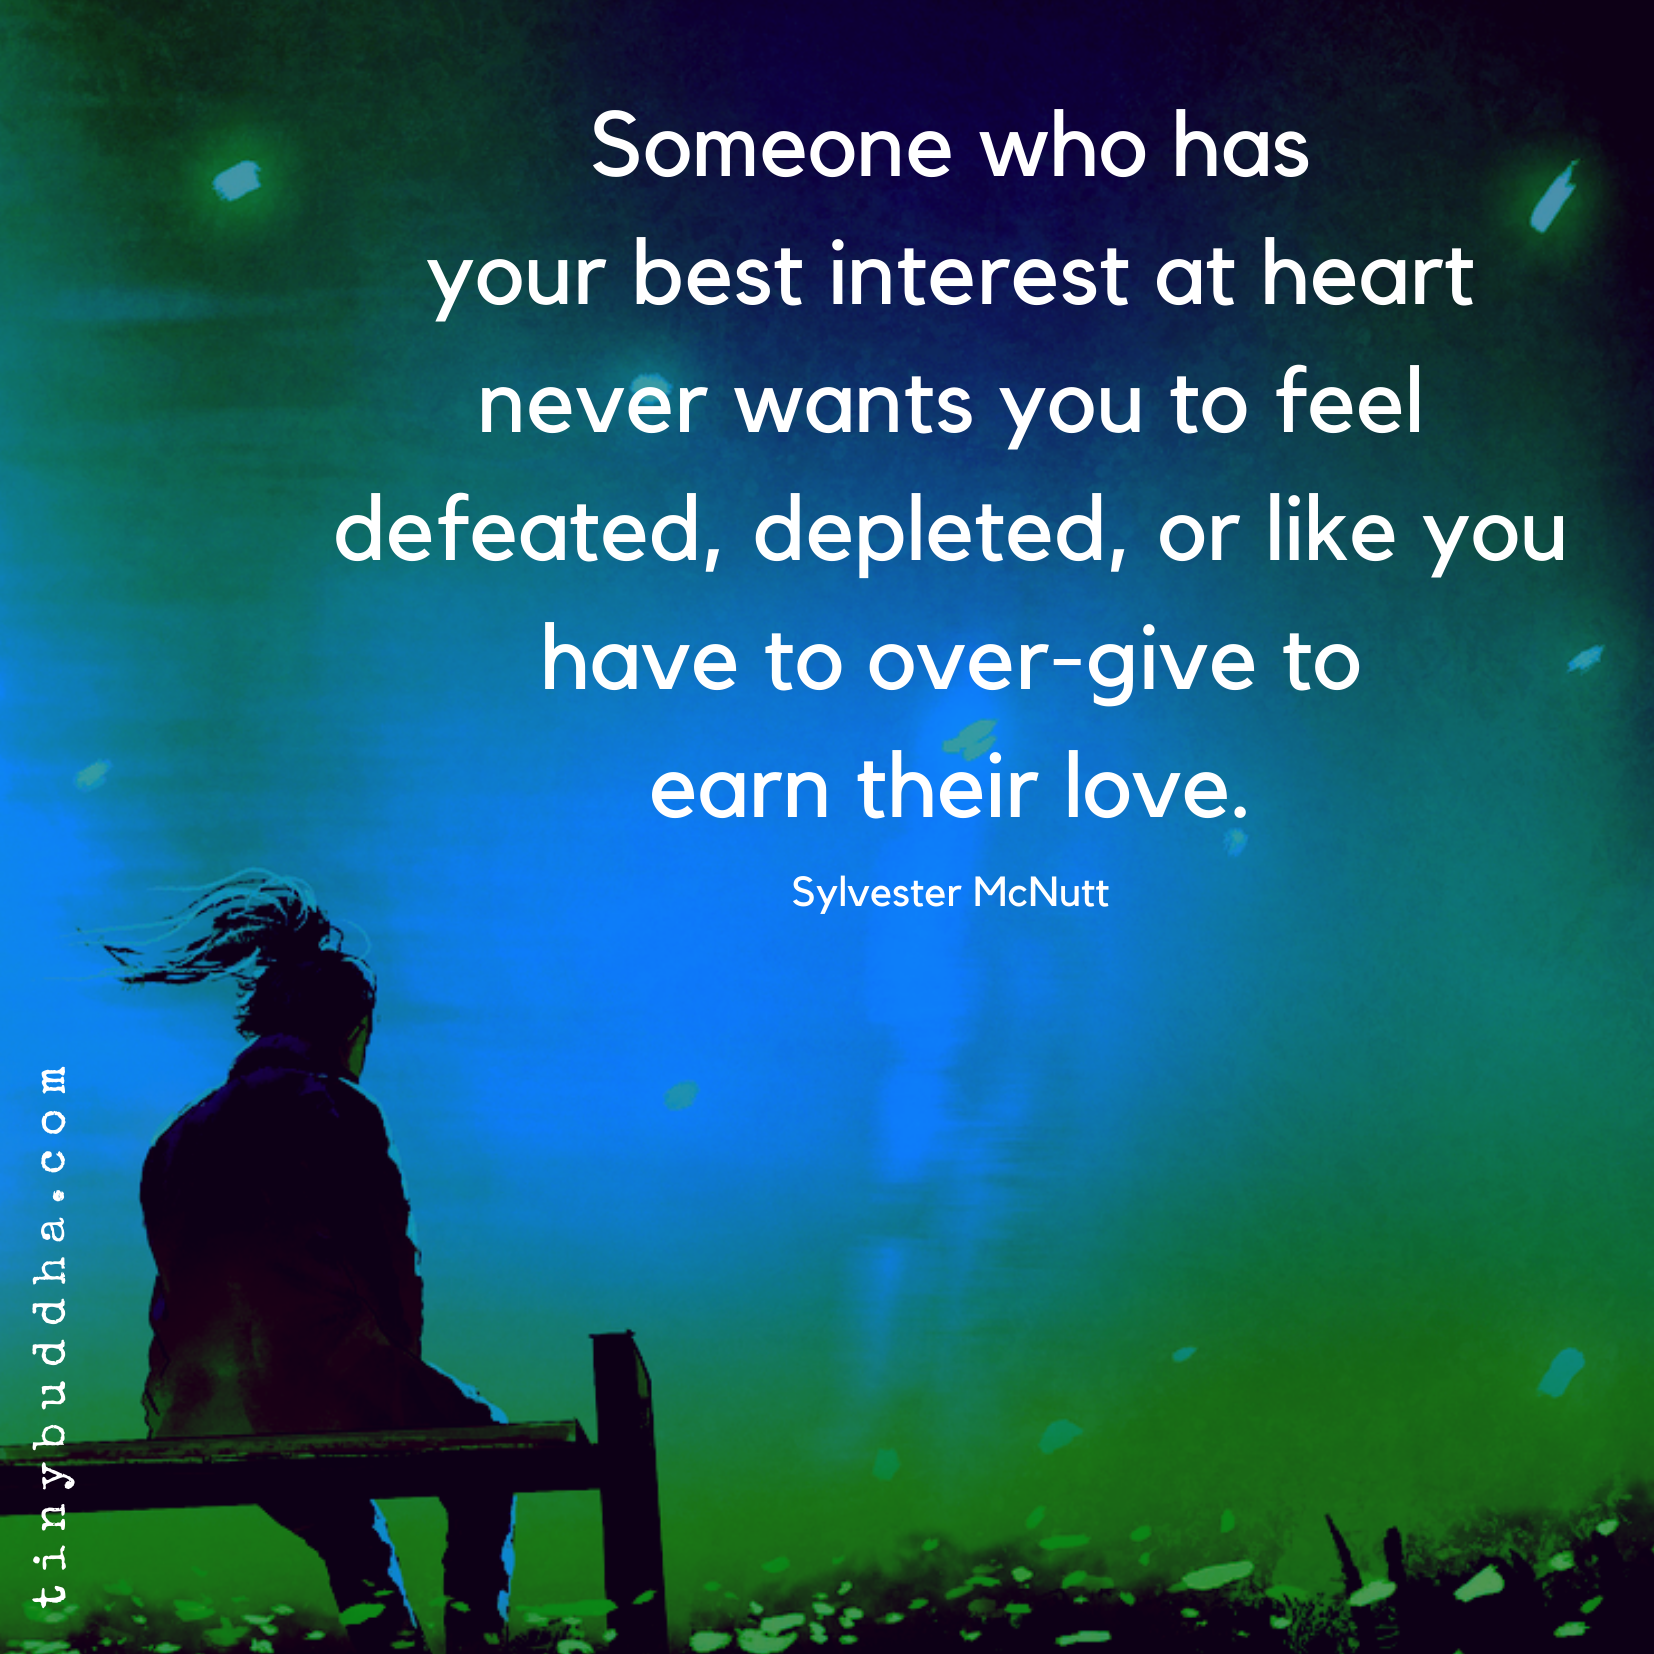 Someone Who Has Your Best Interest at Heart - Tiny Buddha